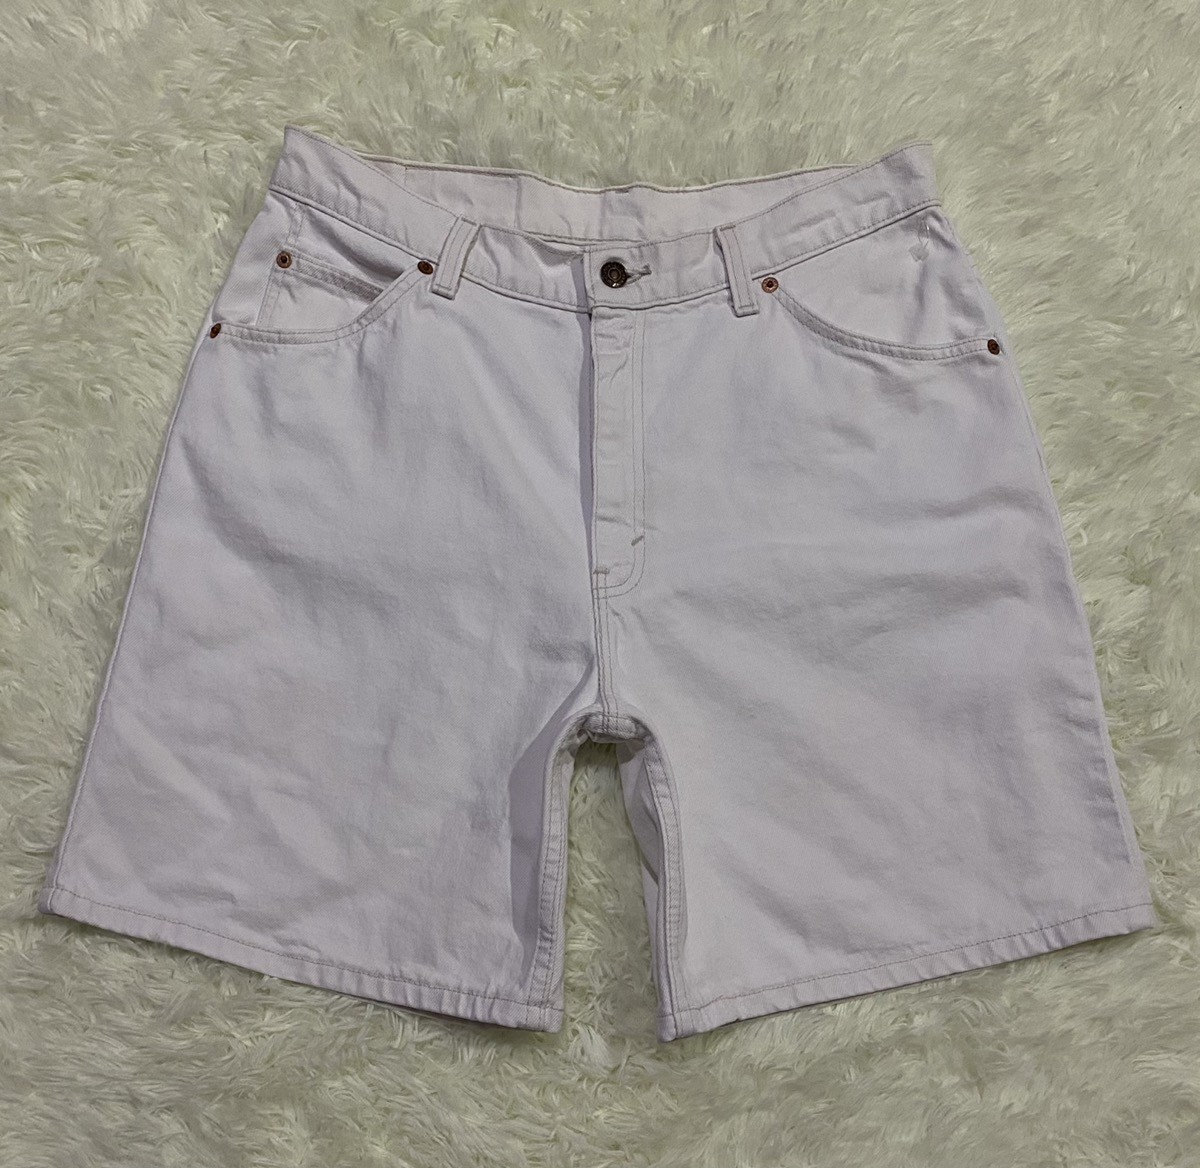 950 Relaxed Fit Orange Tag Short - 1